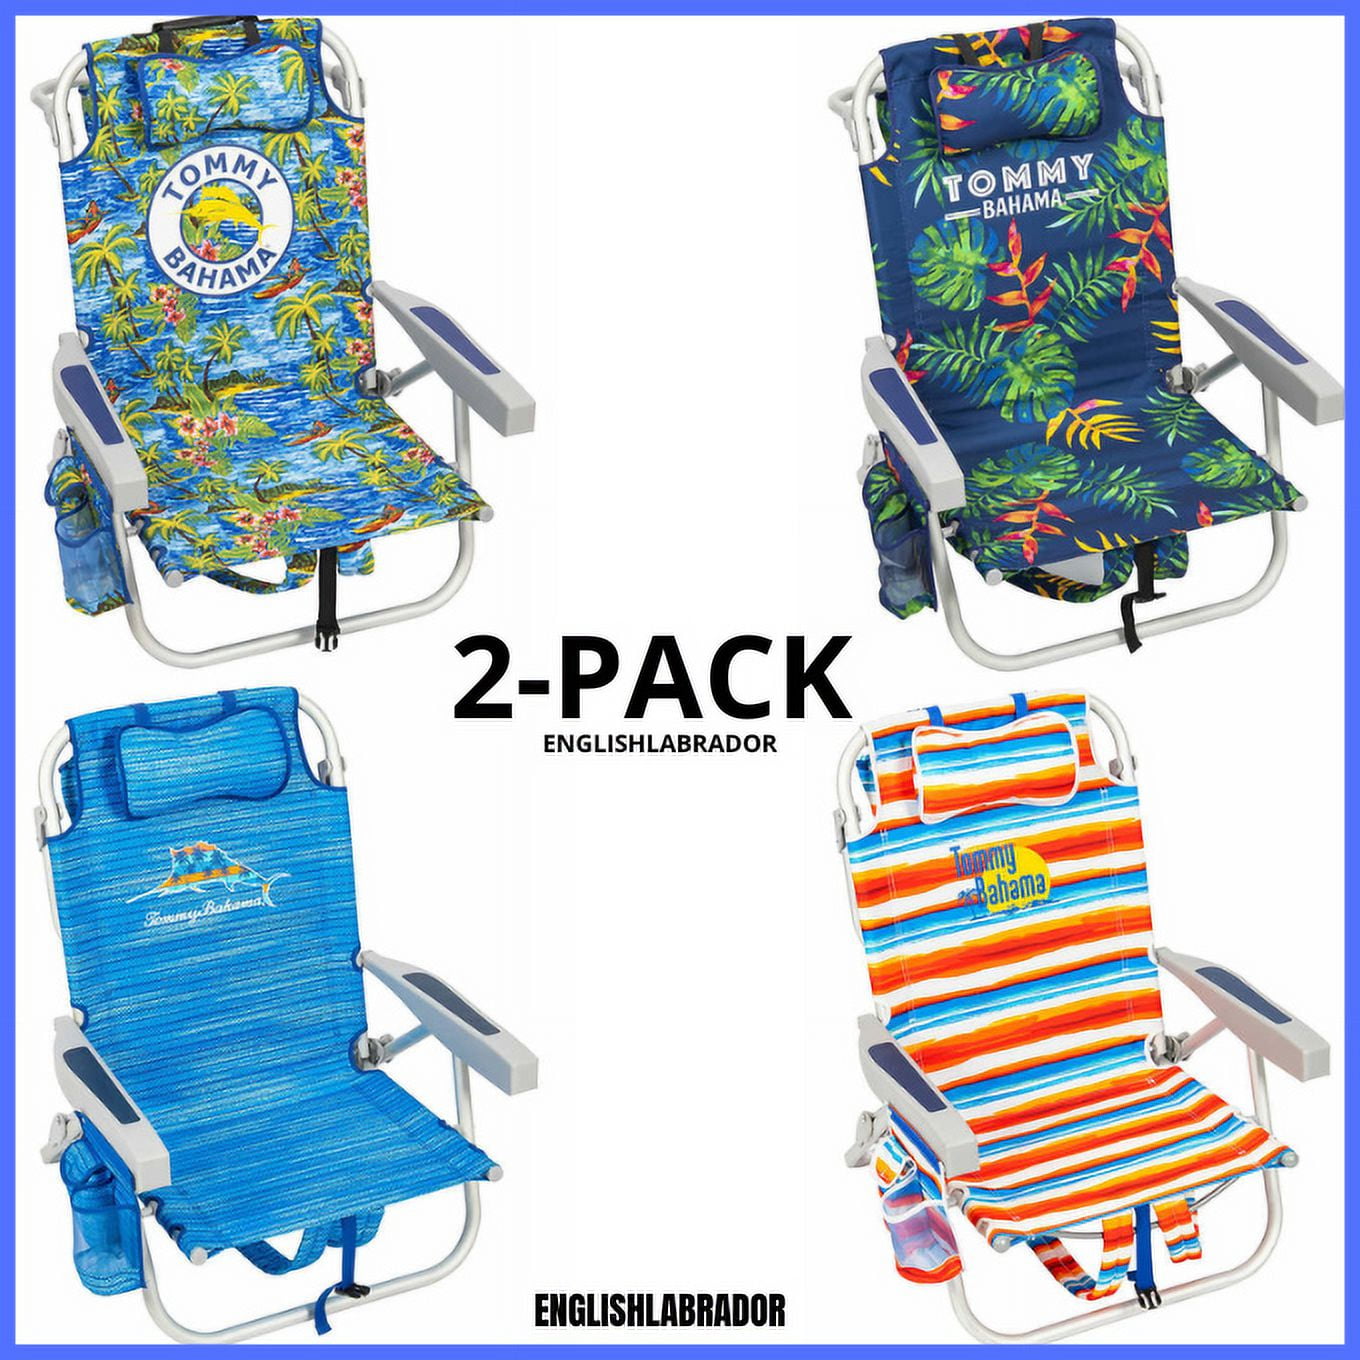 2-Pack Tommy Bahama Beach Chair Lay Flat, Reclining, Adjustable ...